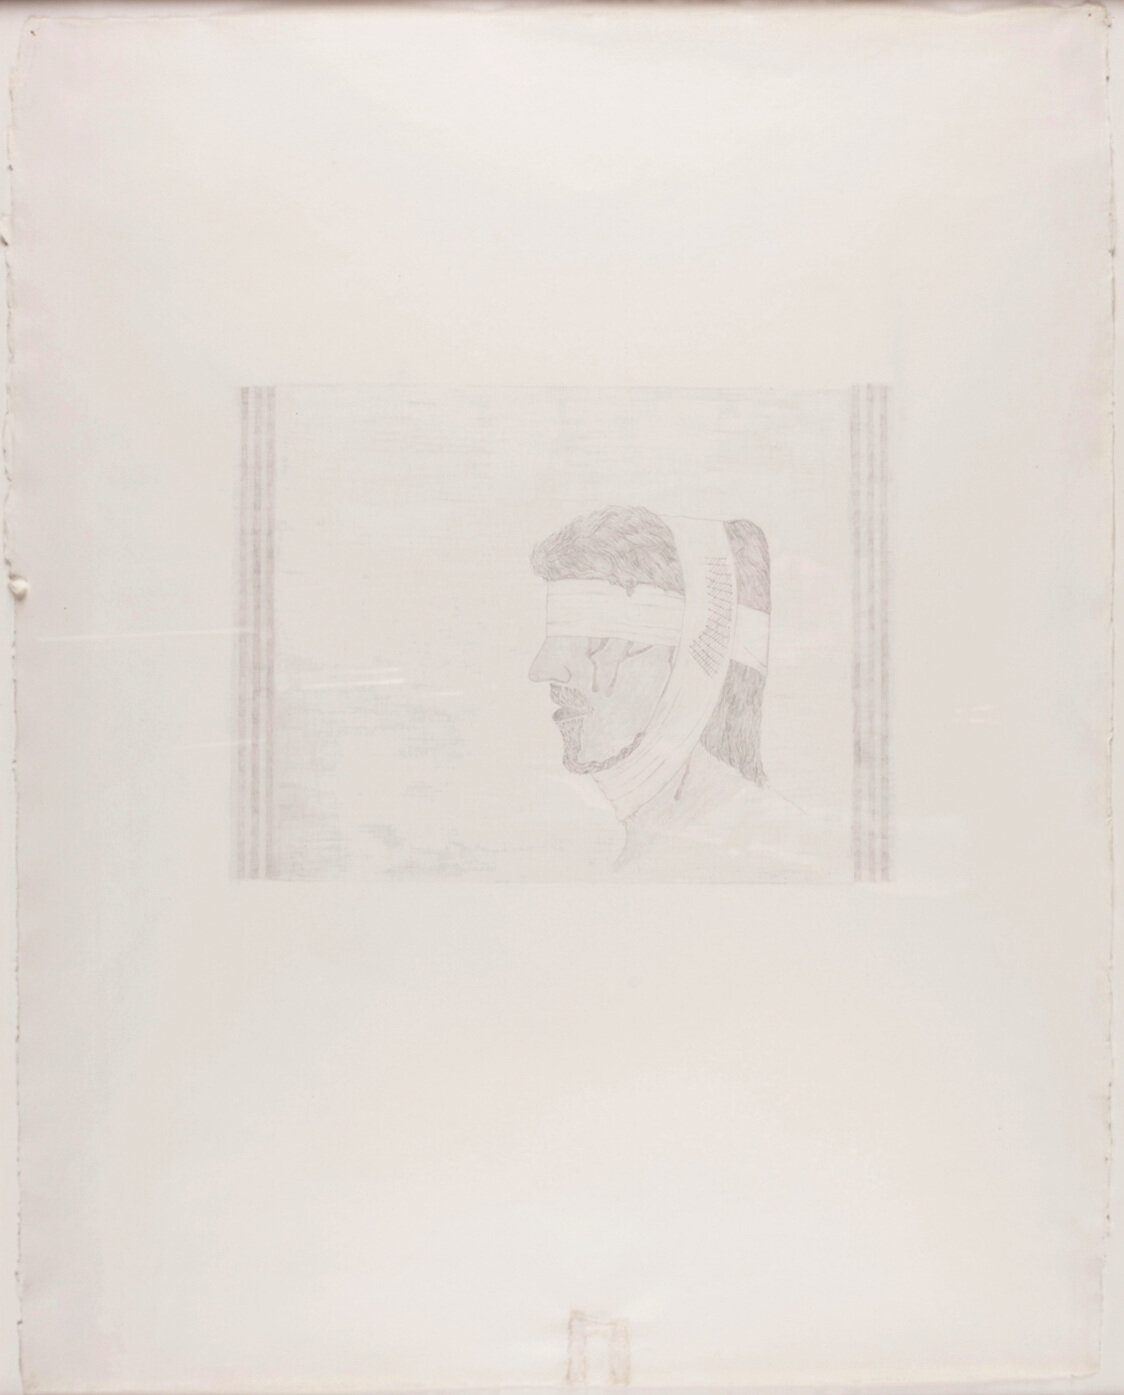  Bandaged Soldier No.1 . 2003. Pencil on Paper. 26" x 21" 